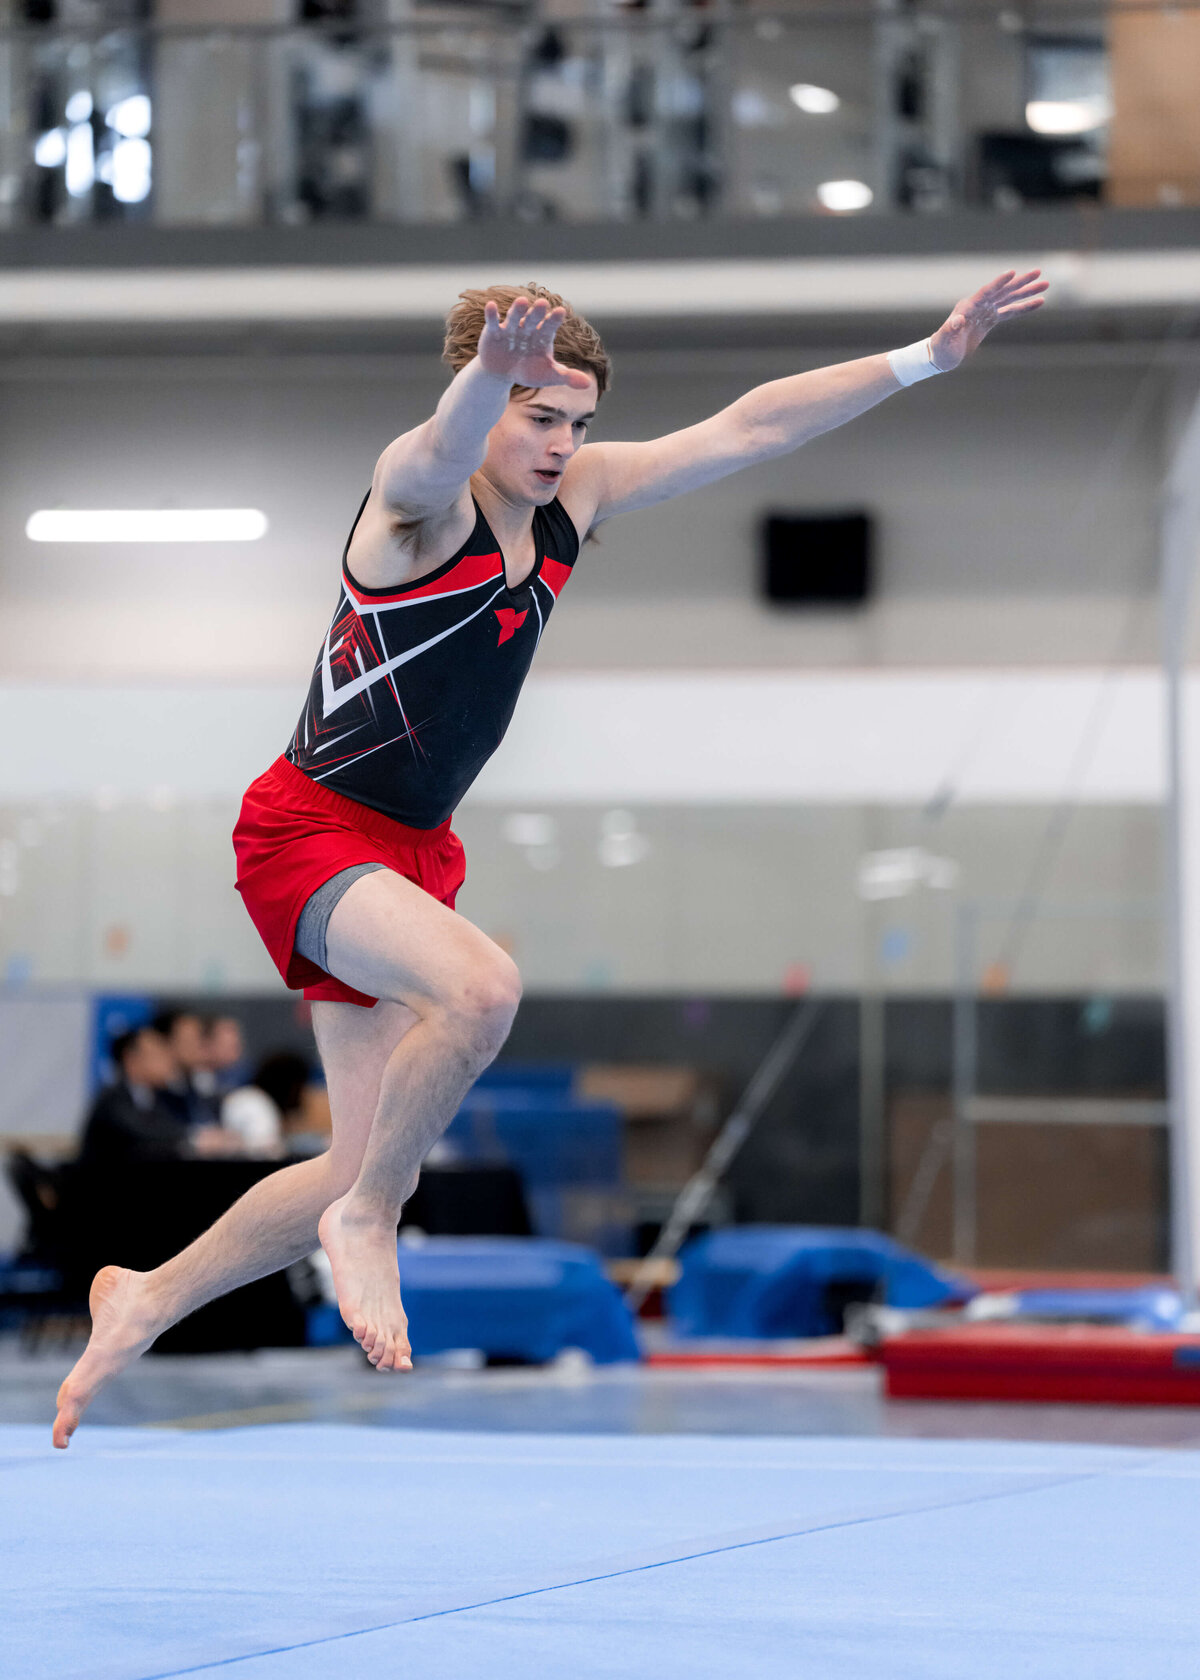 Photo by Luke O'Geil taken at the 2023 inaugural Grizzly Classic men's artistic gymnastics competitionA1_03173